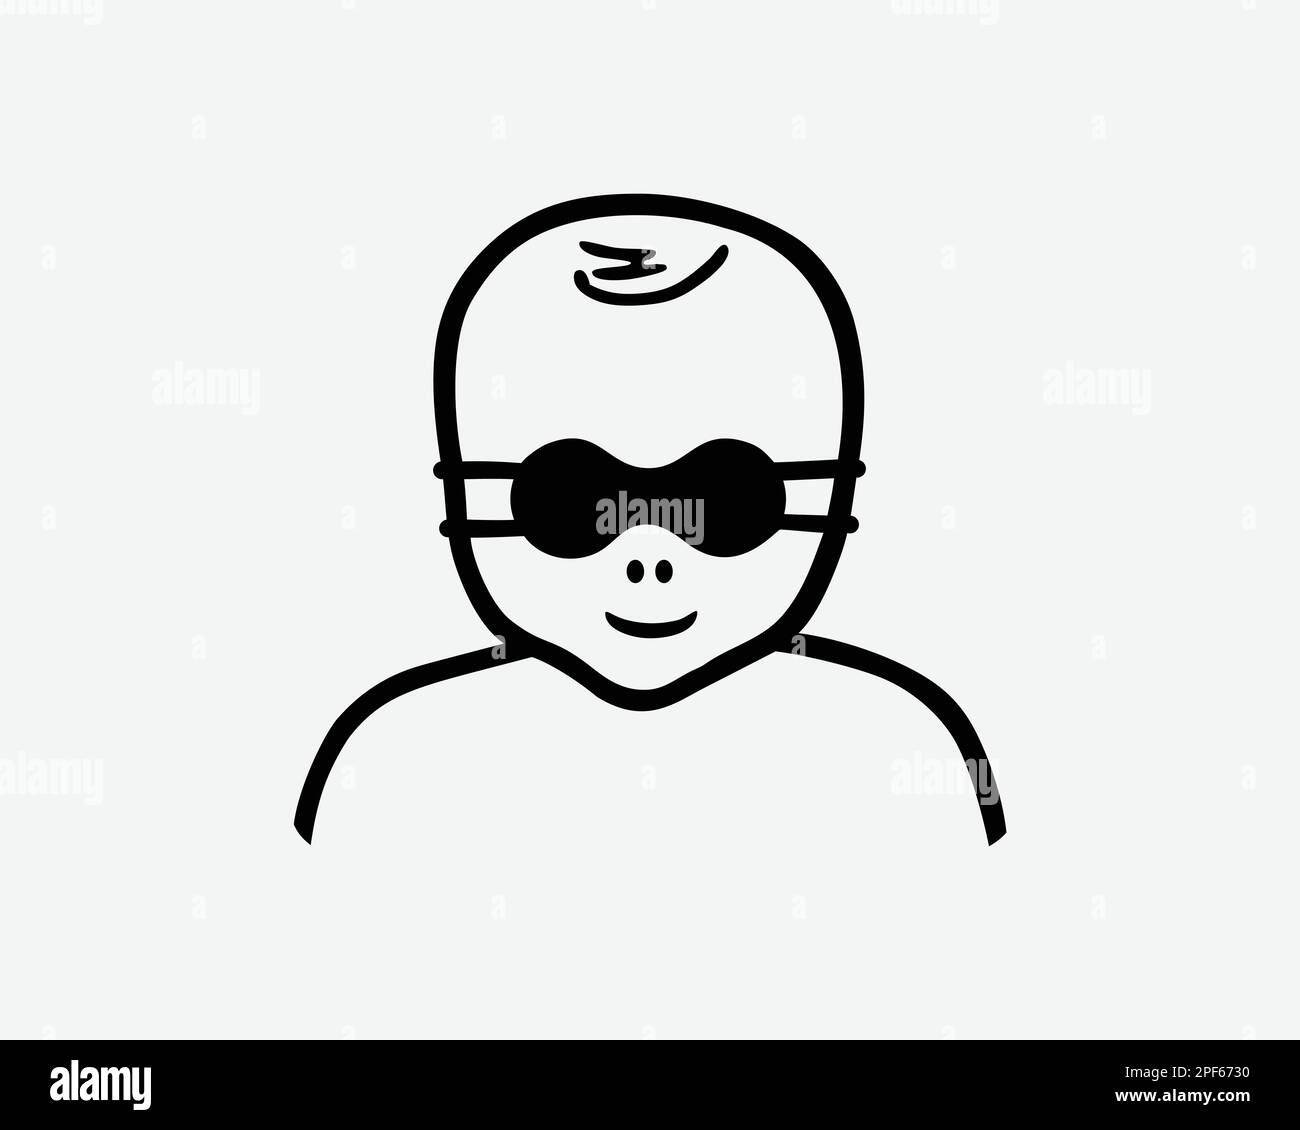 Baby Eye Protection Blind Infant Toodler Child Goggles Black White Silhouette Symbol Icon Sign Graphic Clipart Artwork Illustration Pictogram Vector Stock Vector